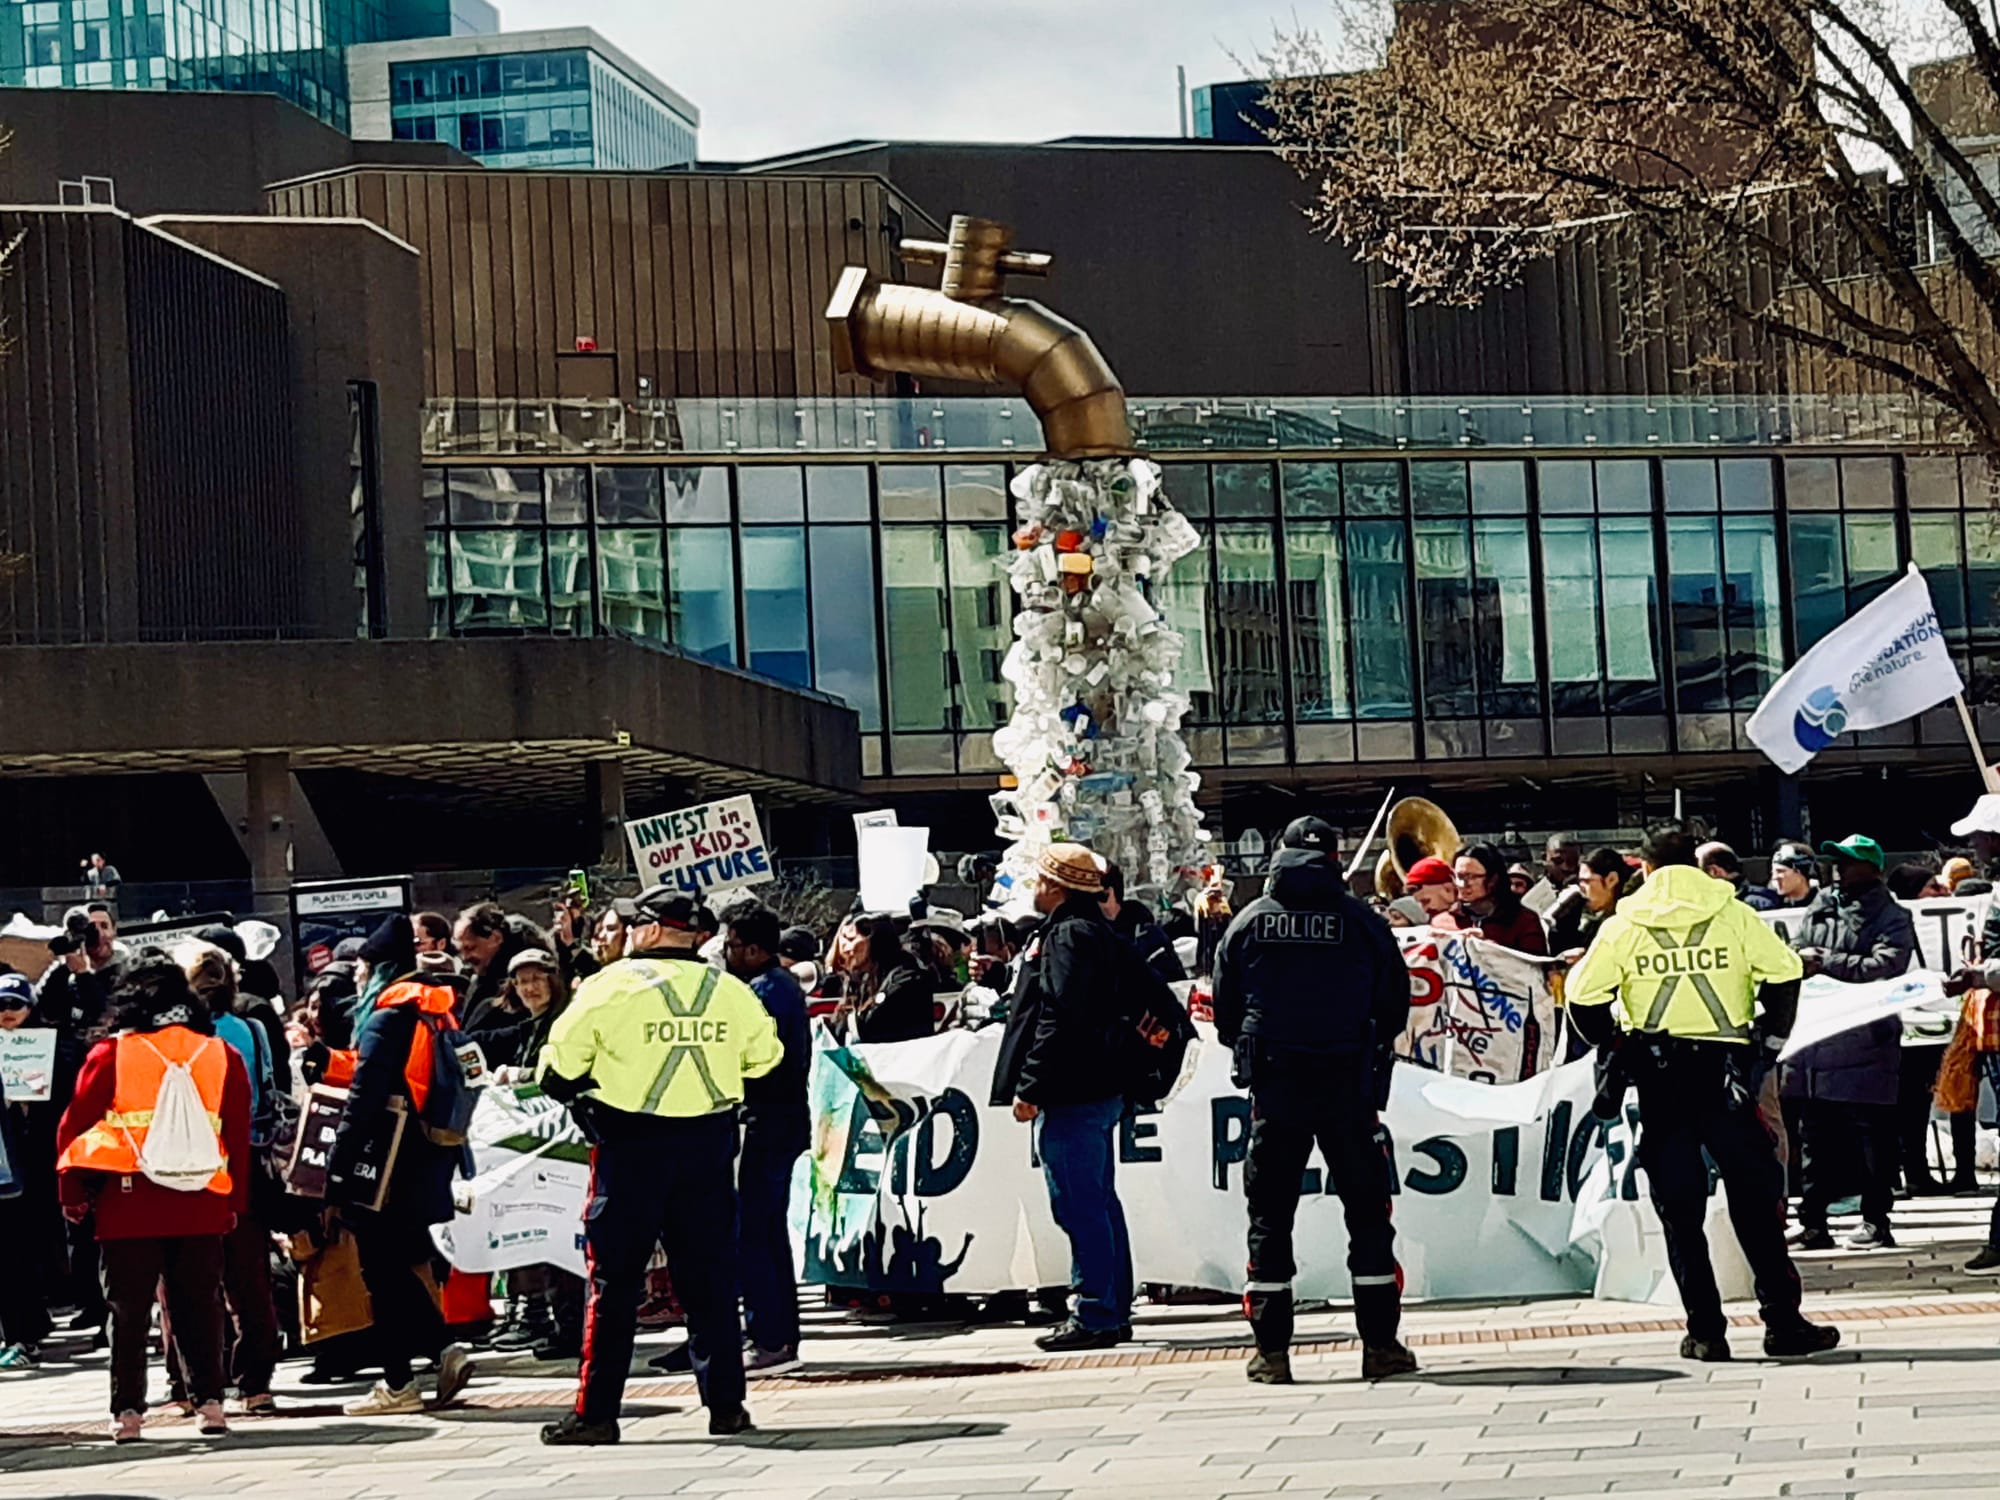 Police watch over a protest at the plastic treaty talks in Ottawa